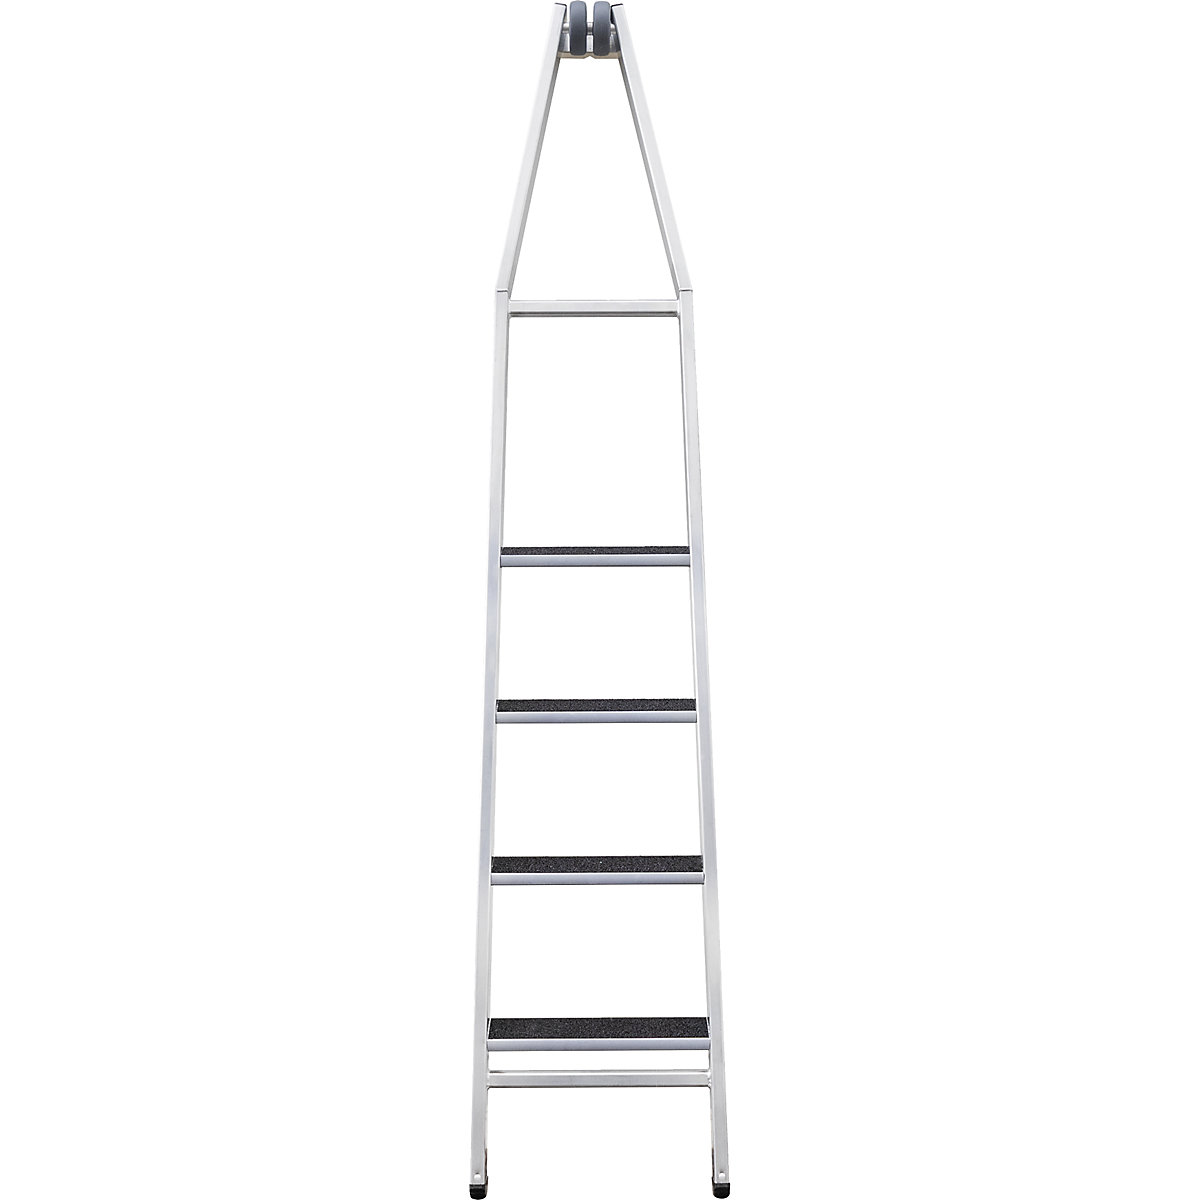 Glass cleaner step ladder – MUNK, components of top section, 4 steps, with tread cover, 2+ items-3